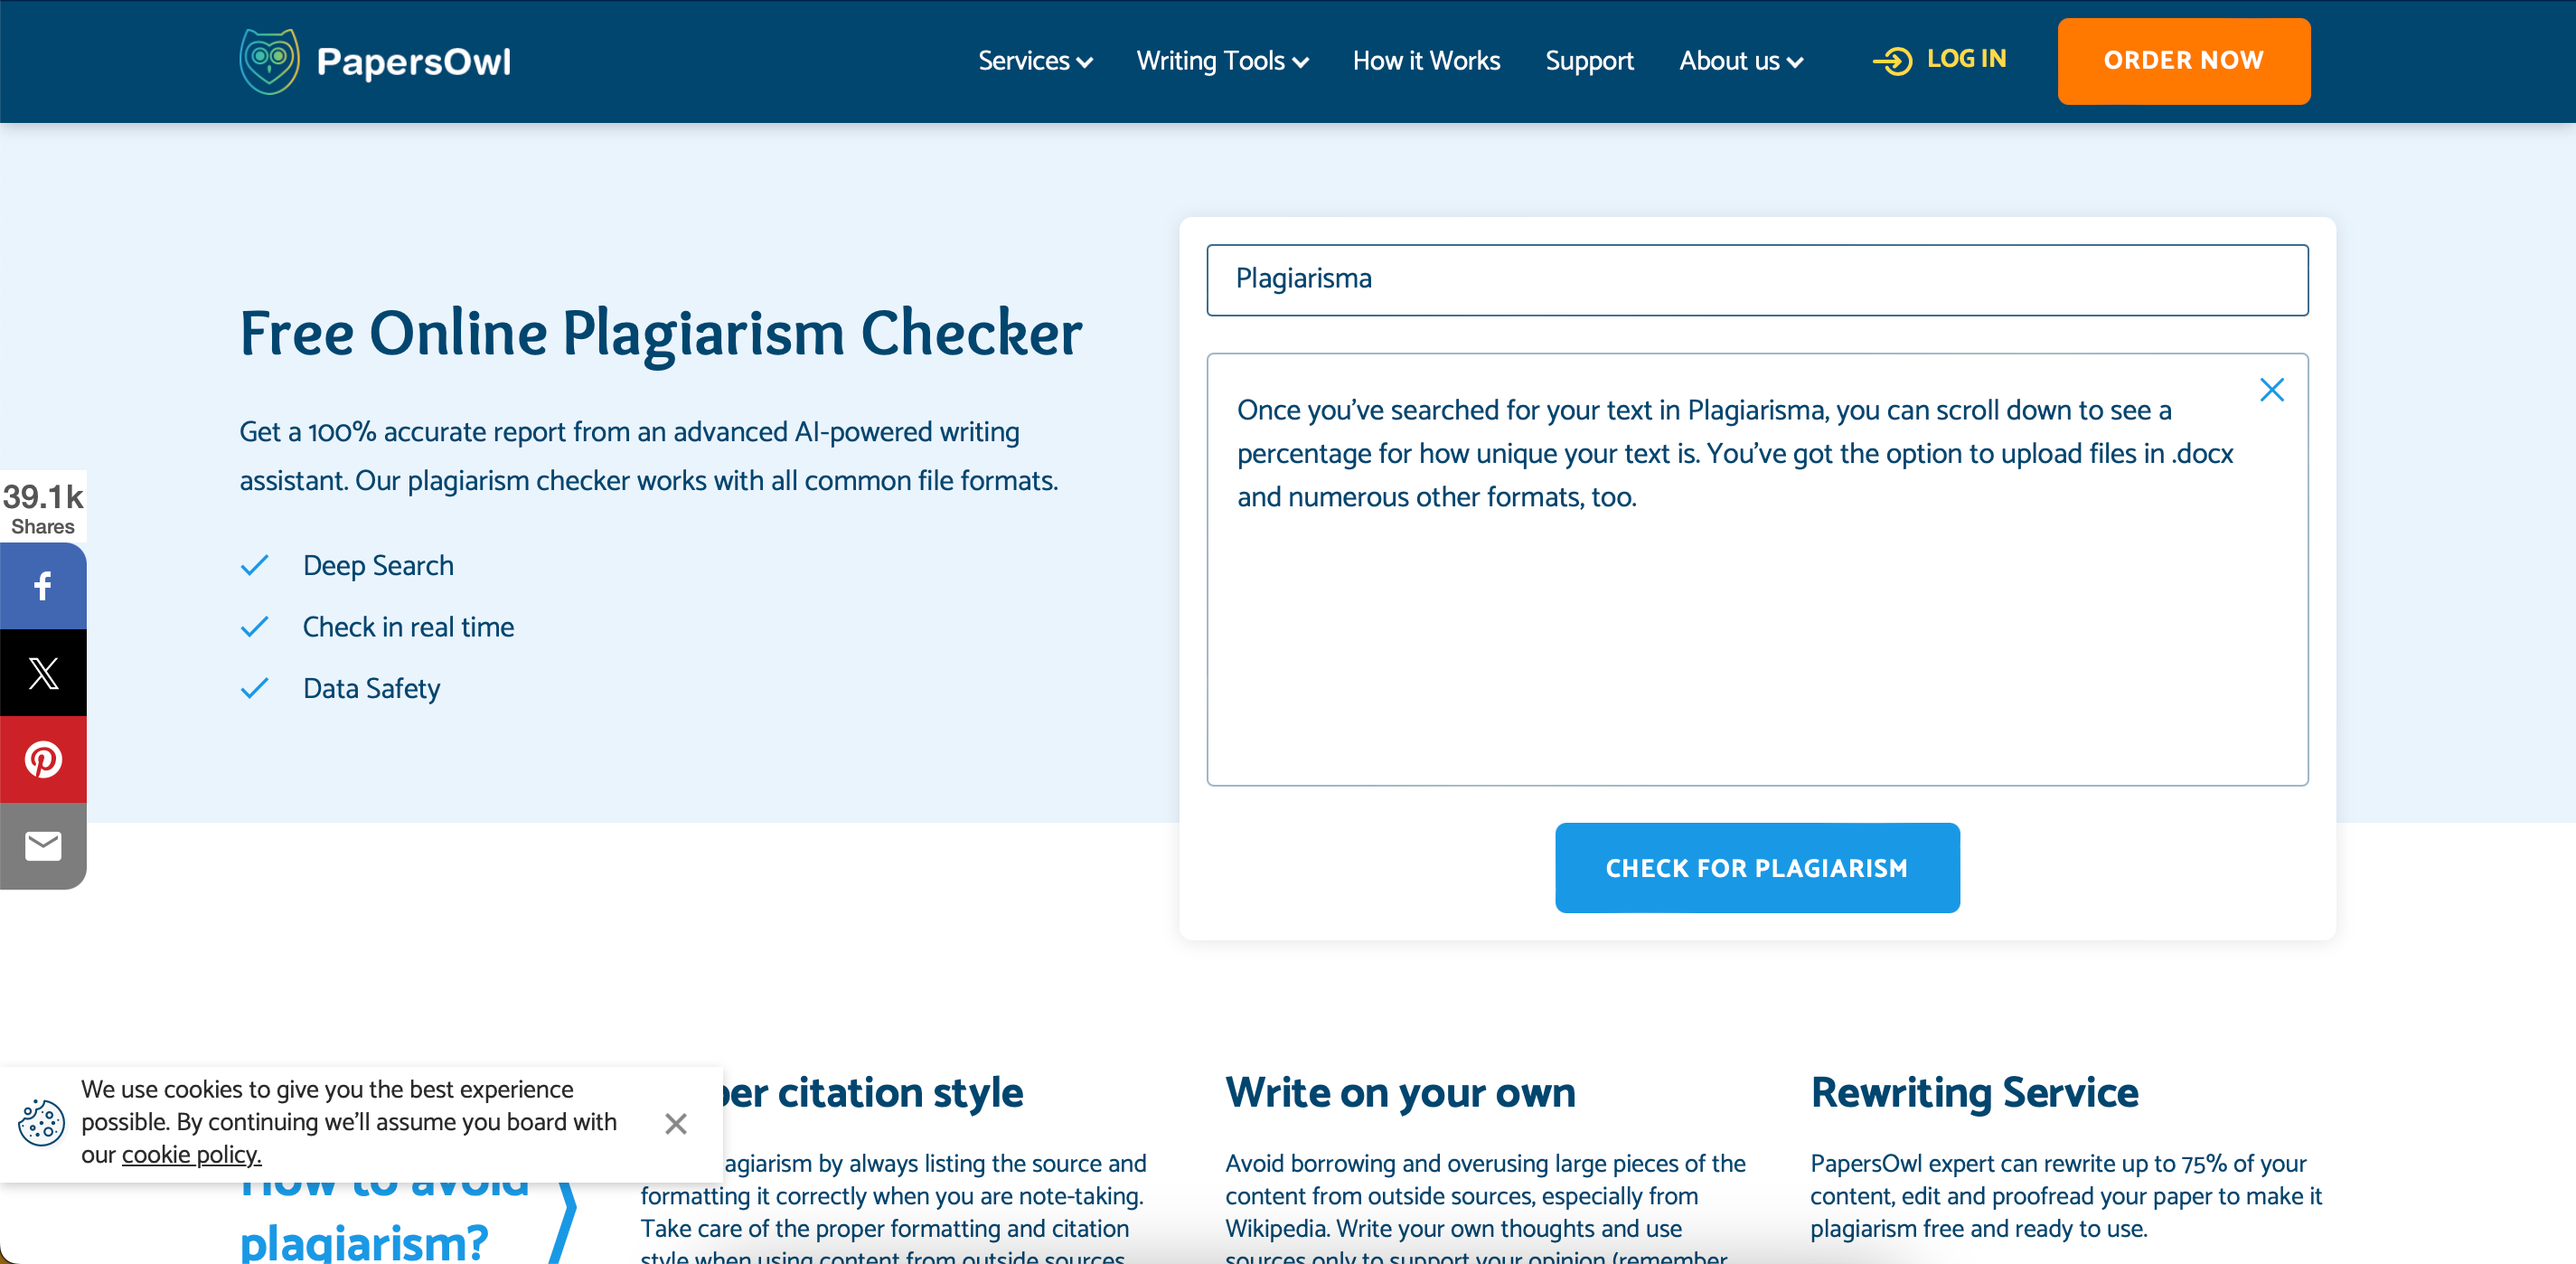 Checking text for plagiarism in PaperOwl